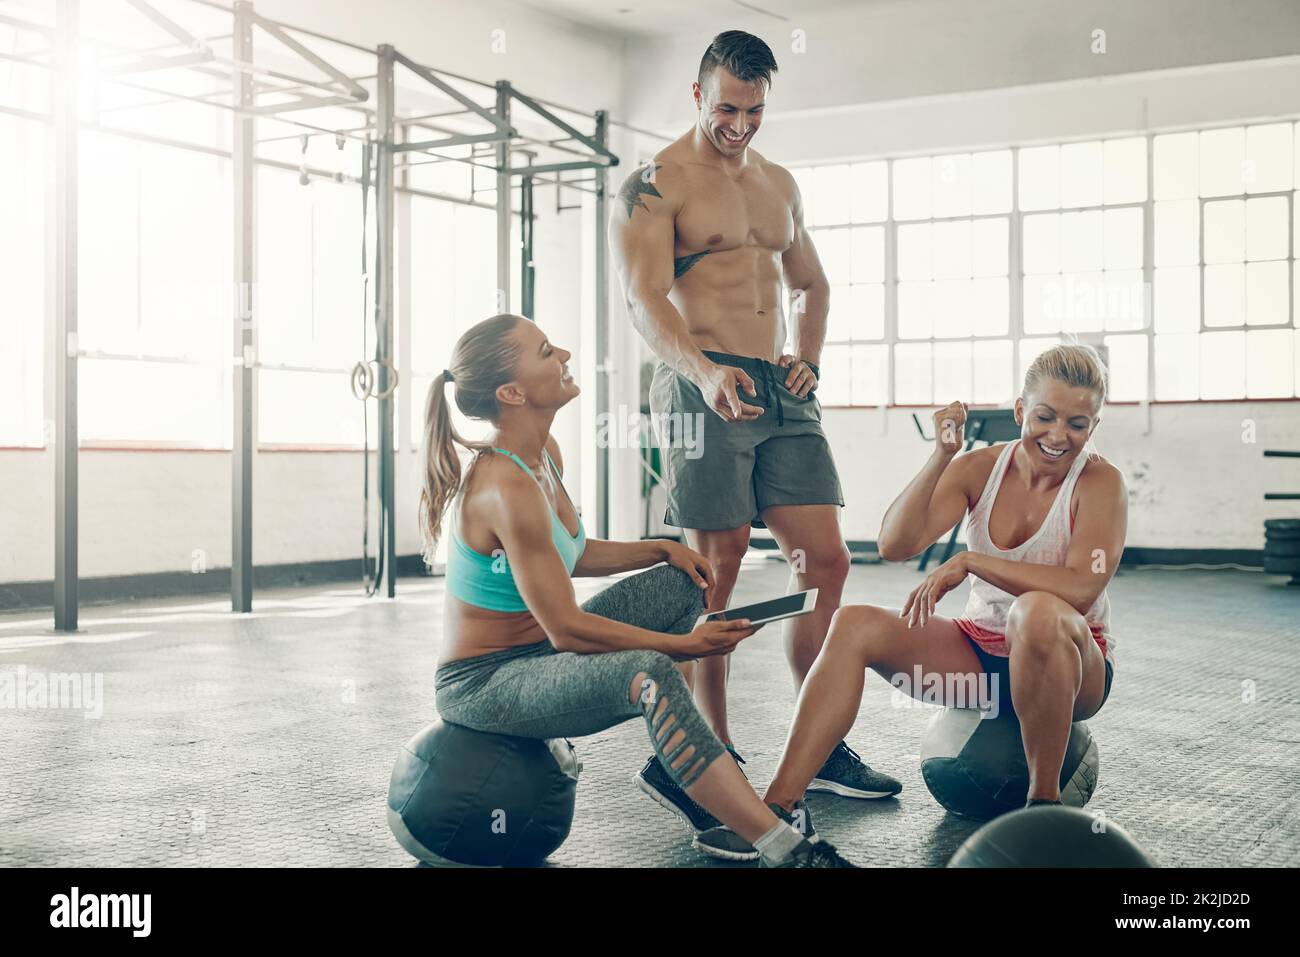 Checking out whats new on their favourite fitness blogs. Shot of a group of young people using a digital tablet at the gym. Stock Photo